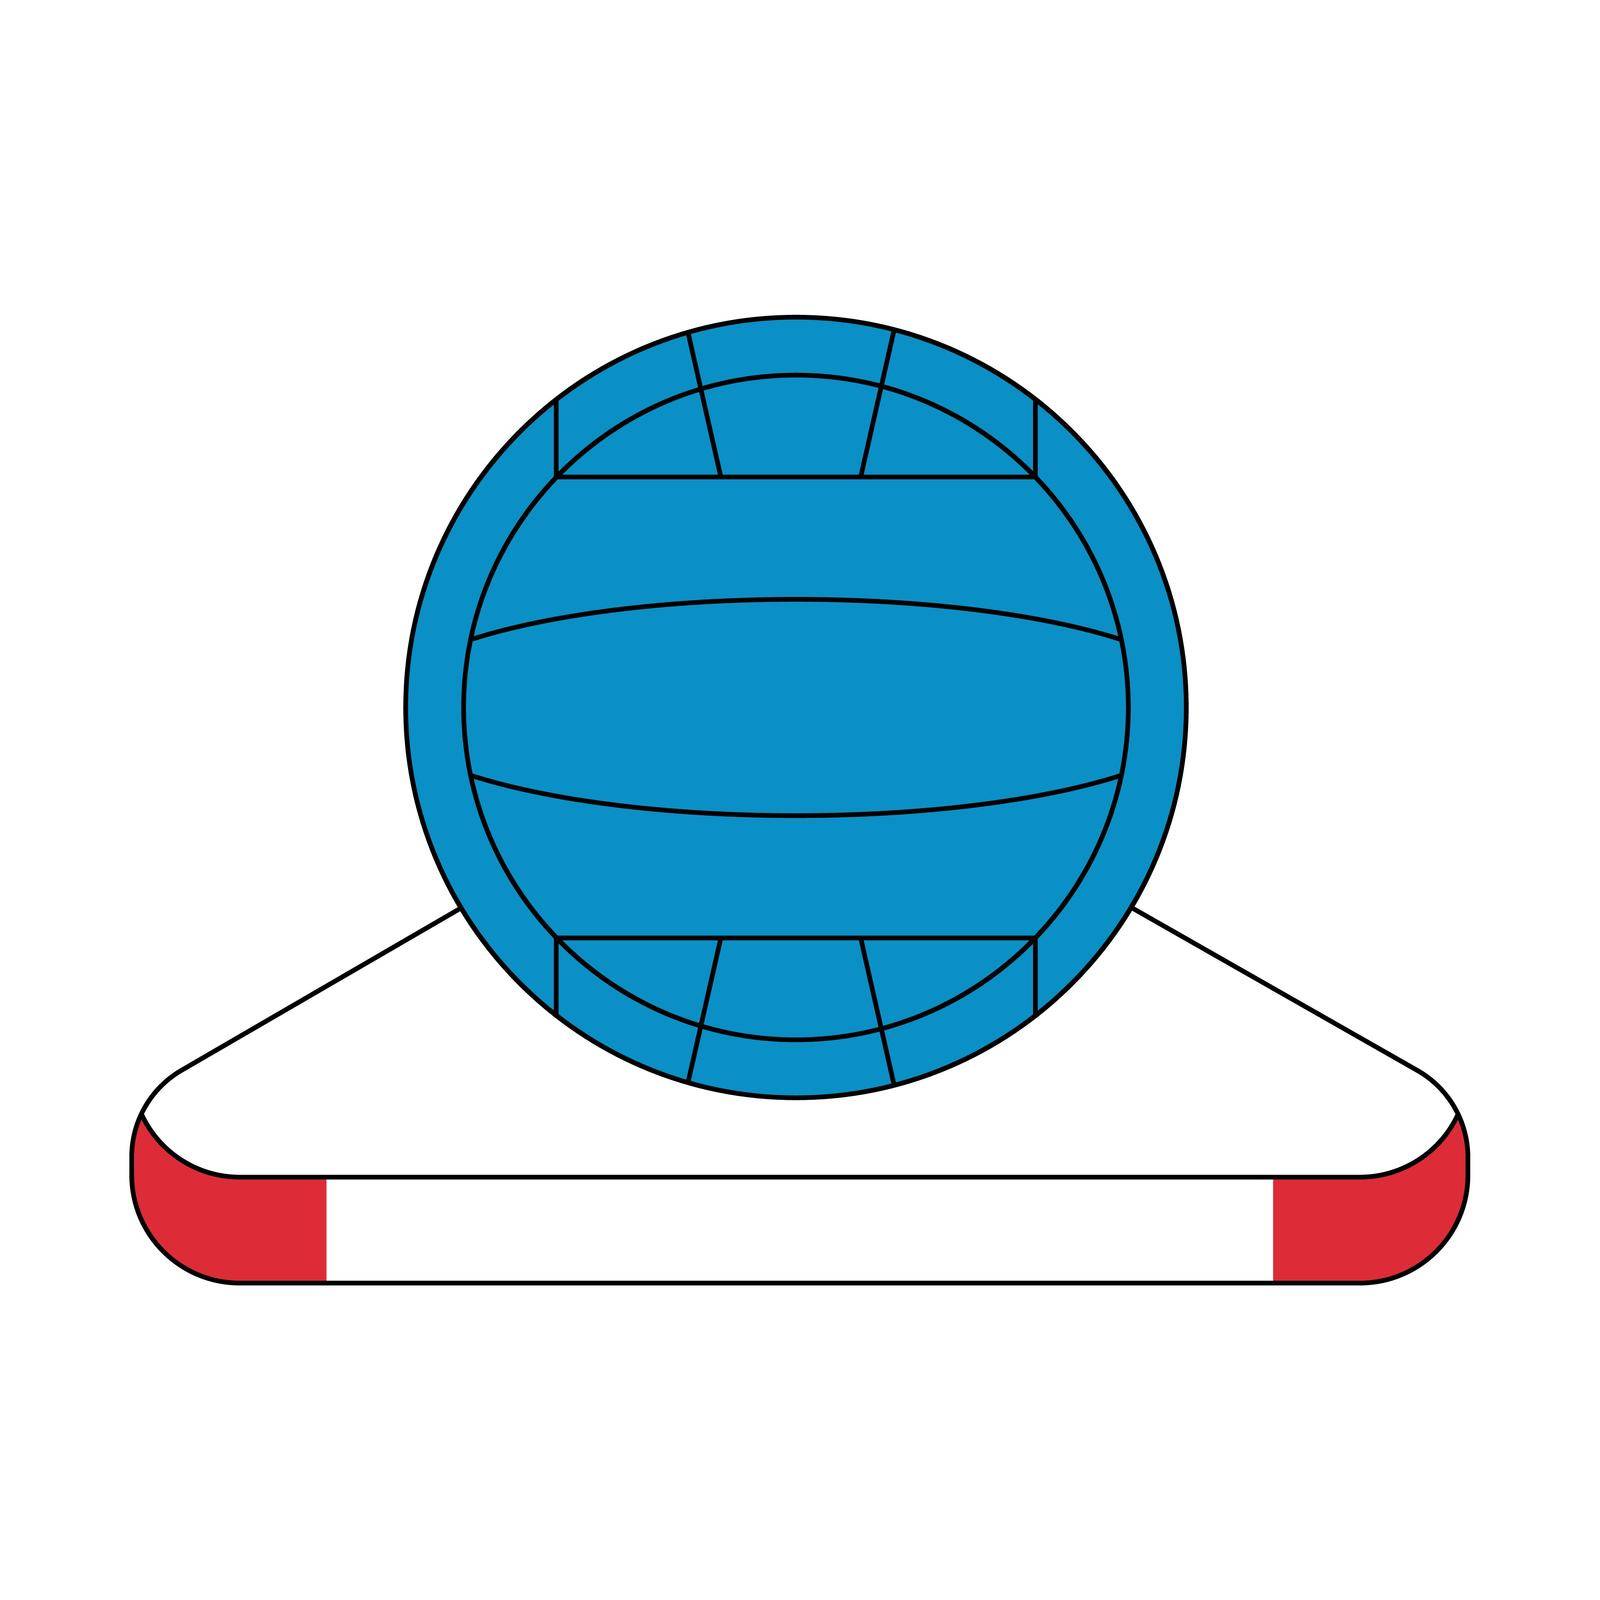 Water polo ball release pictogram vector illustration.